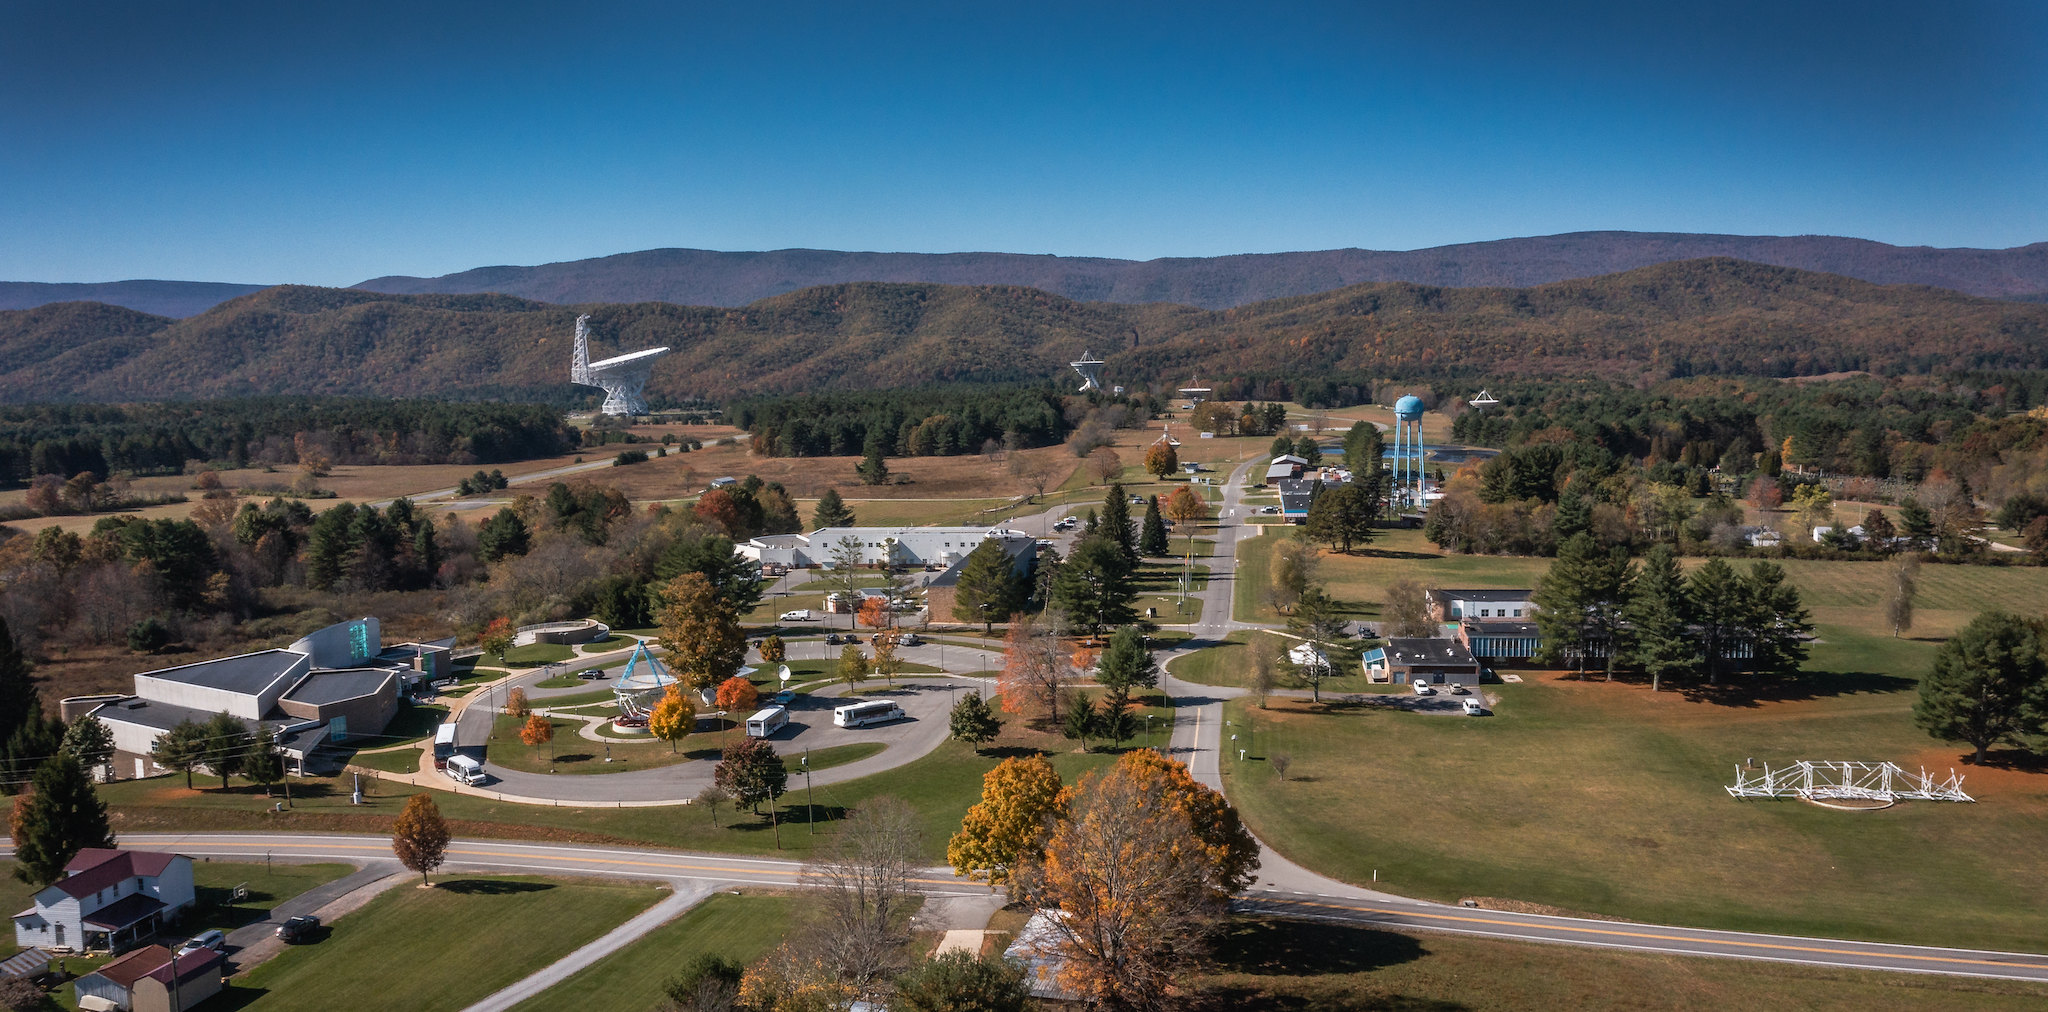 American Physical Society Recognizes Green Bank Observatory as Historic Site